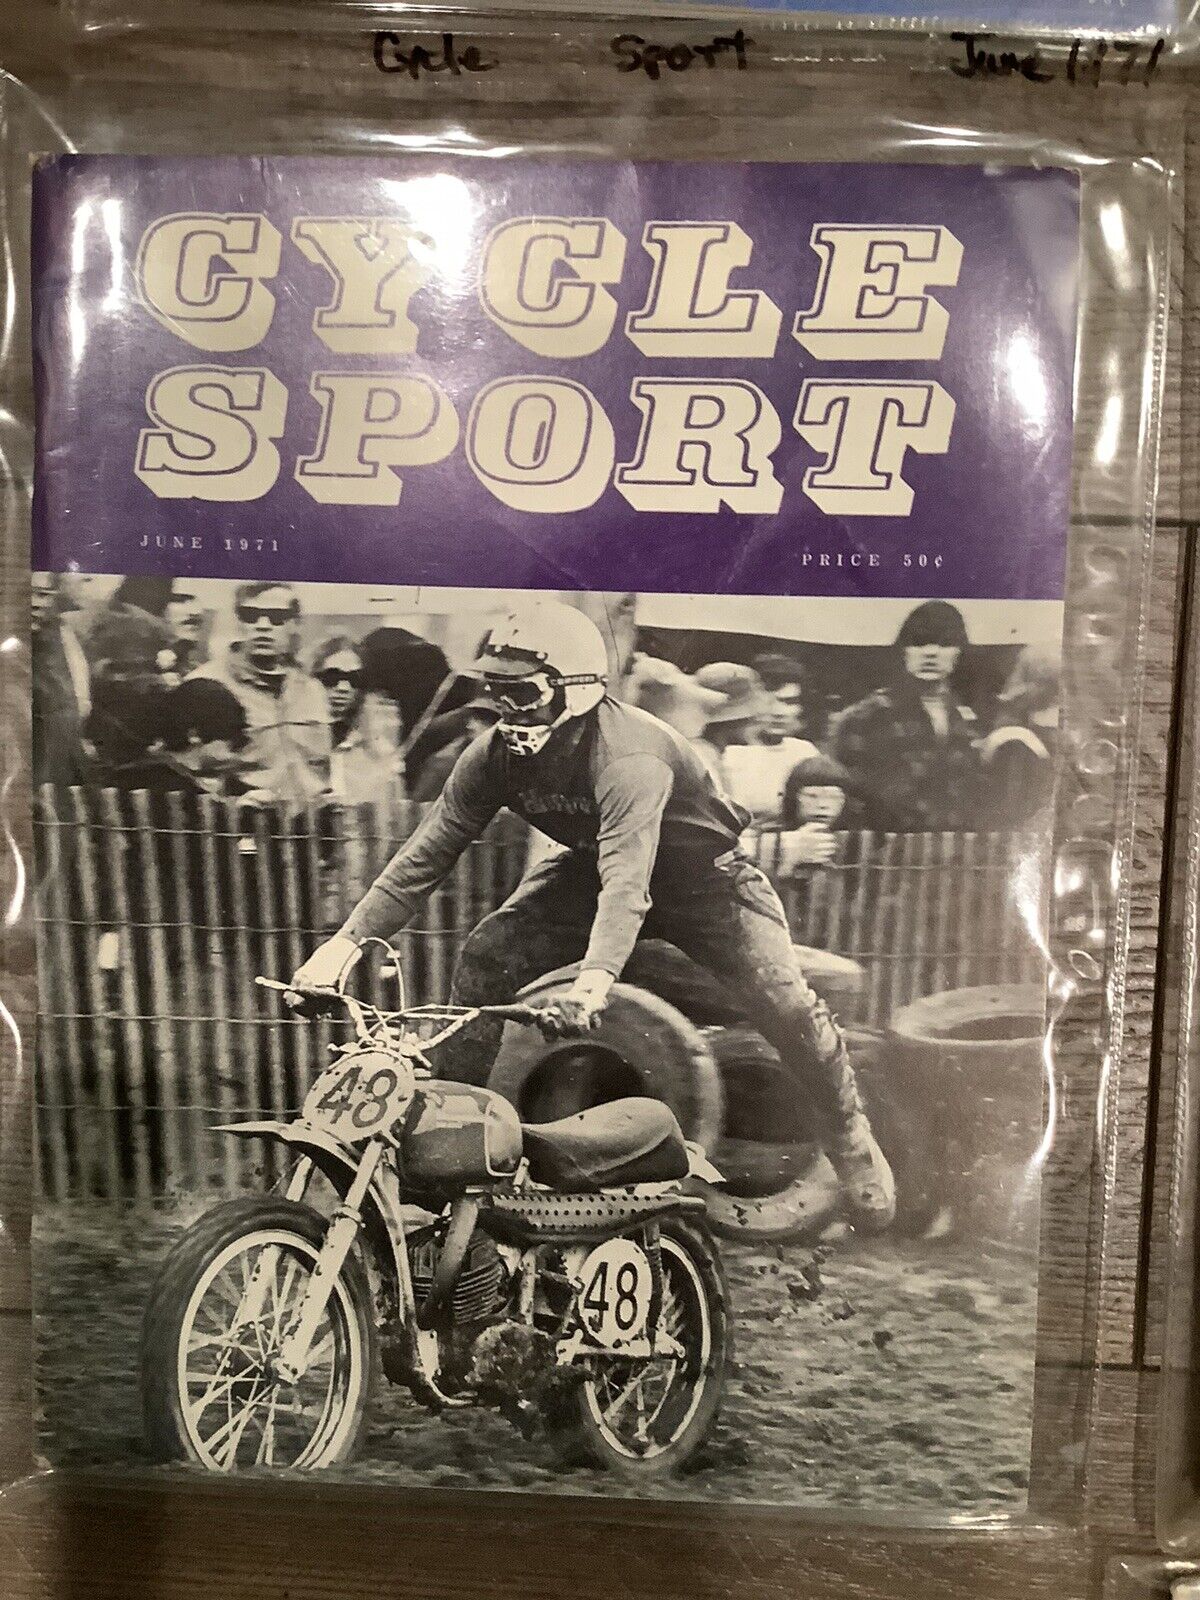 8 Cycle Sport Magazines With Harley Davidson Dirtbike Ads Early 1970S MOTORCYCLE